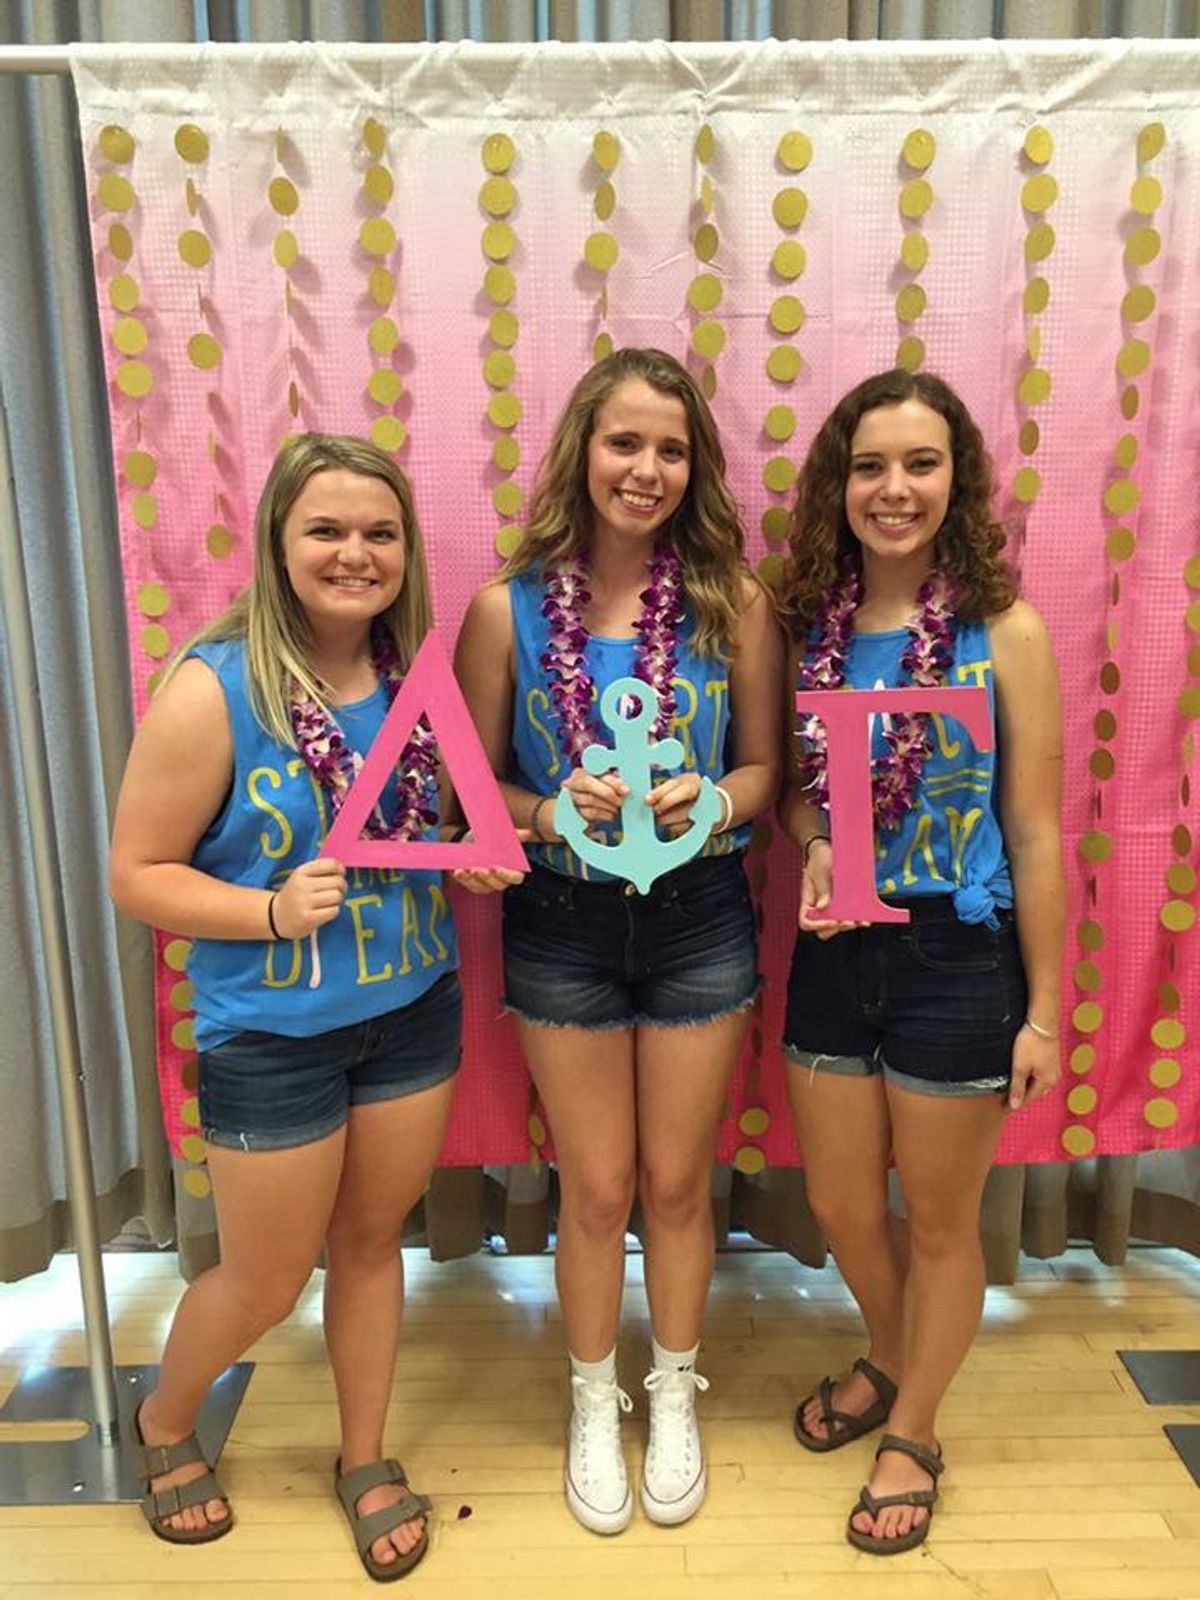 10 Typical Sorority Stereotypes